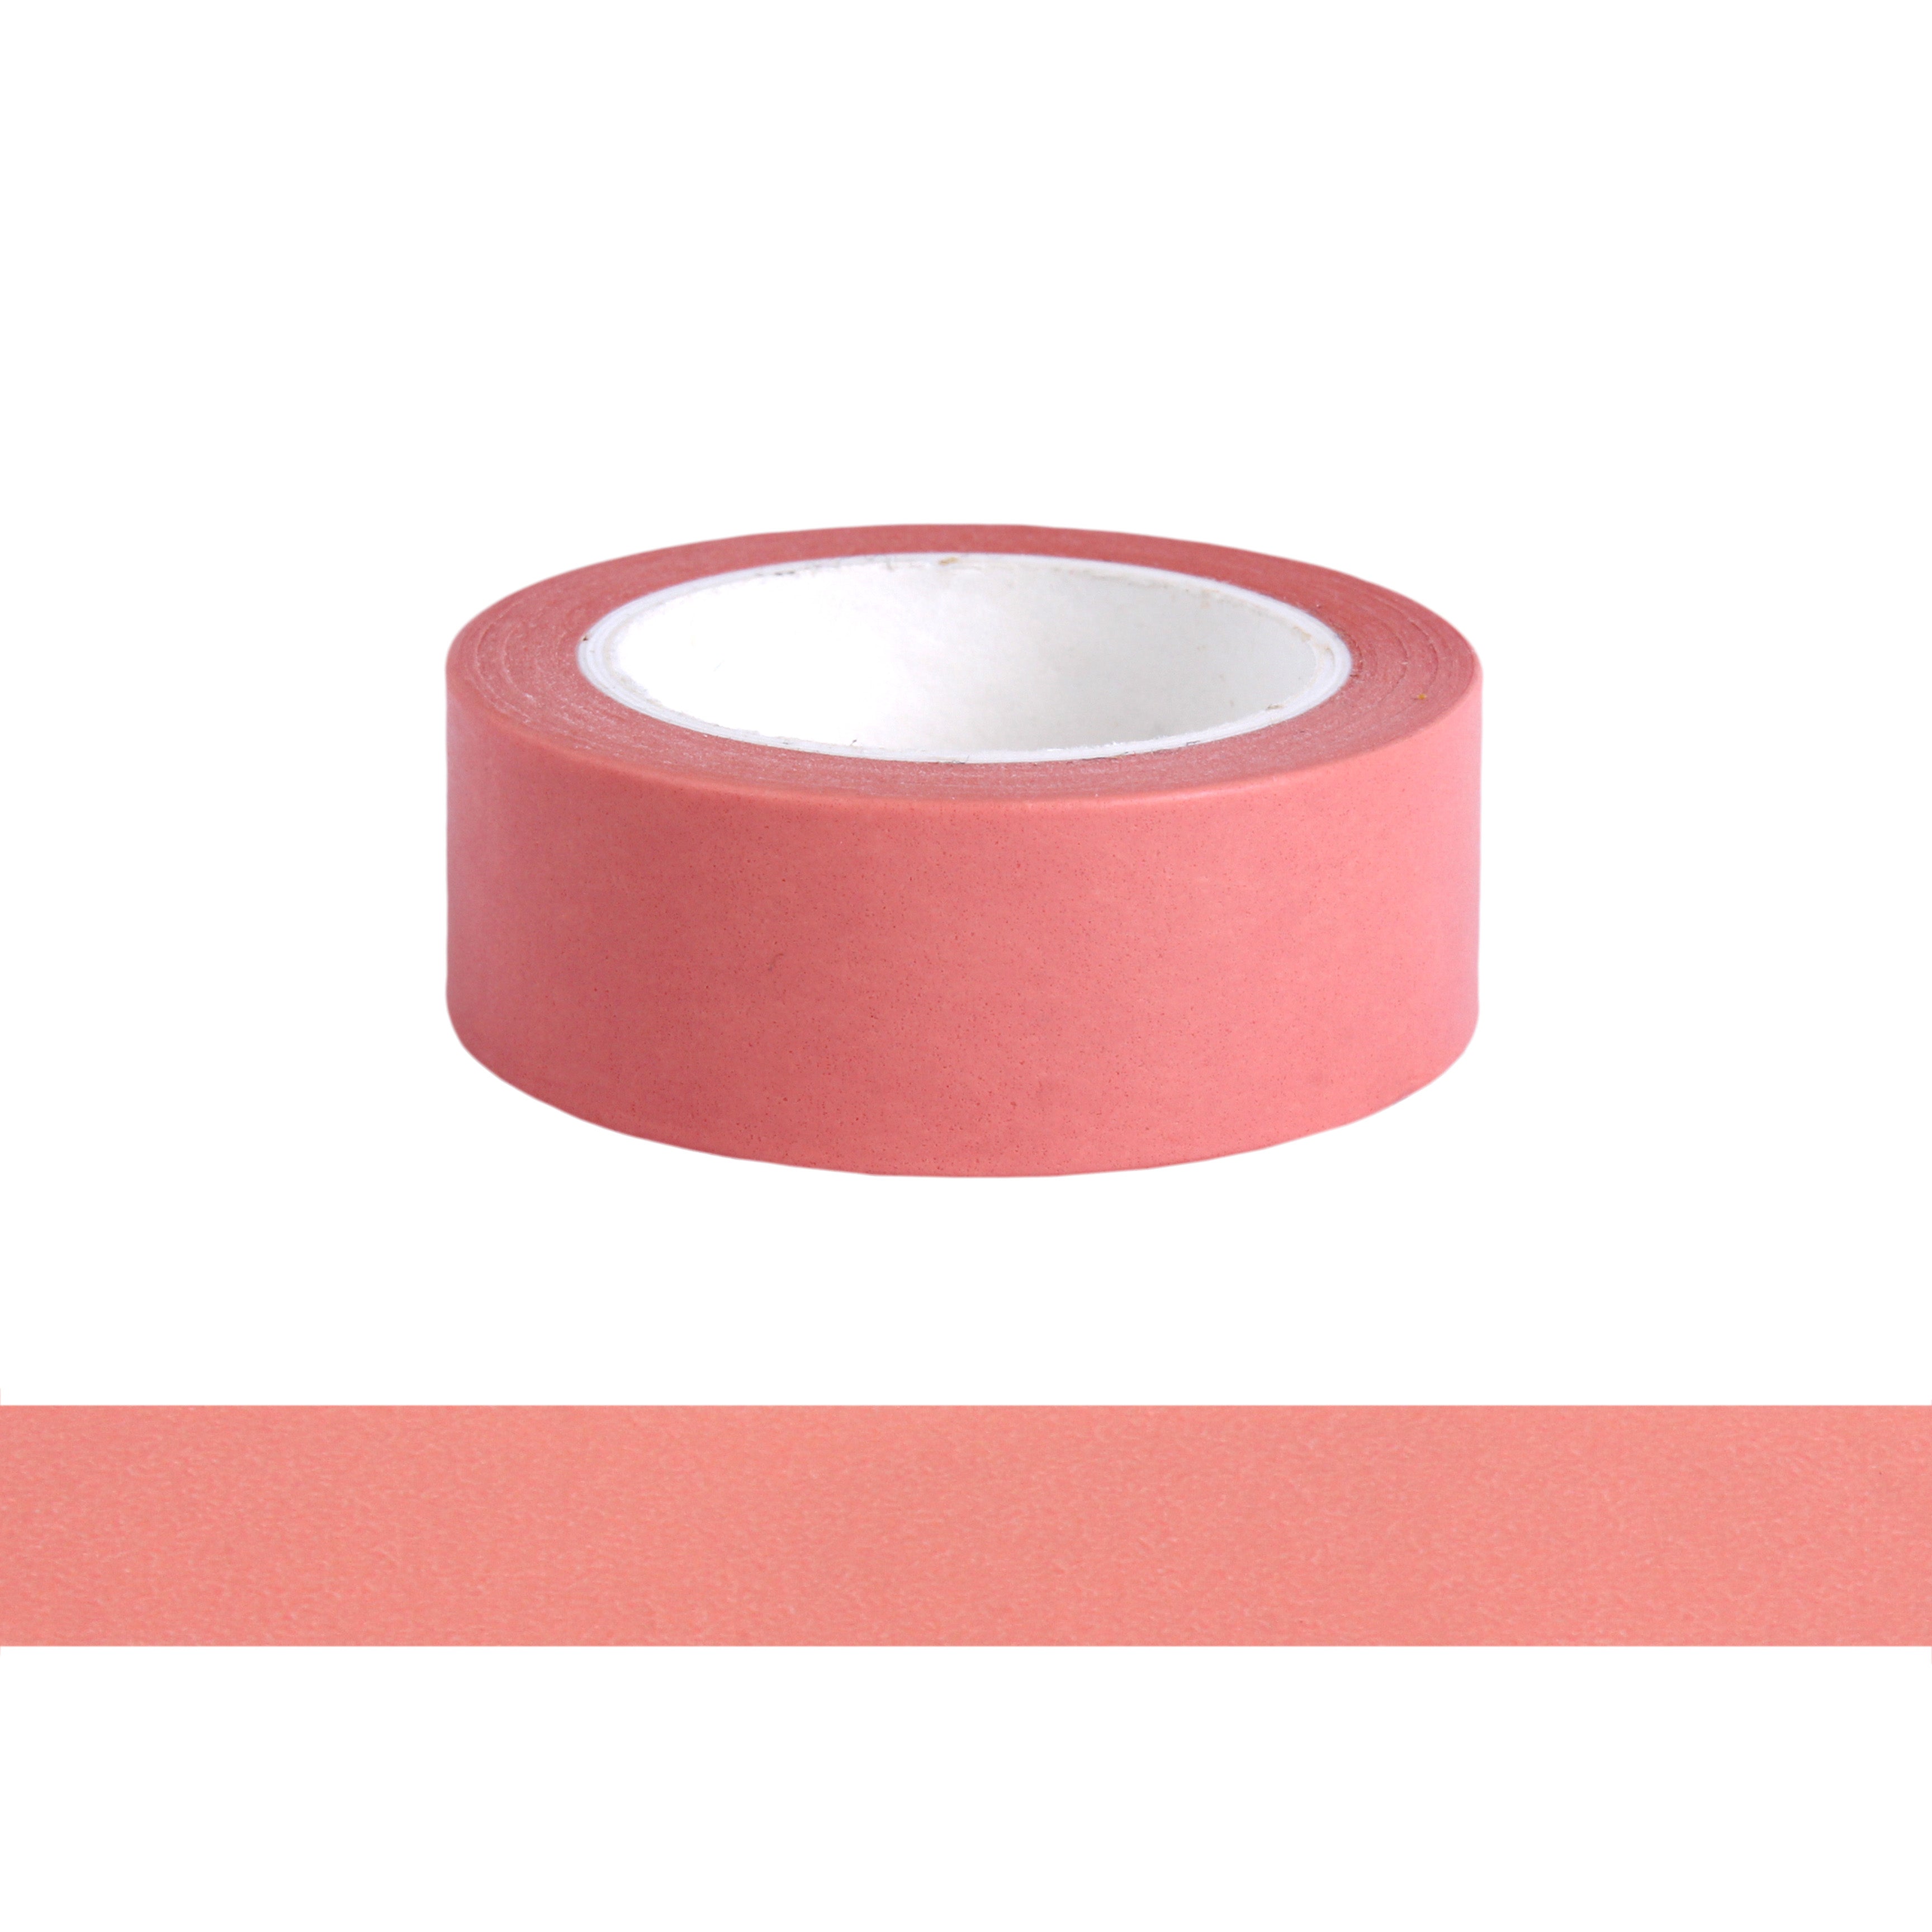 Washi Tape Solid Coral 15mmx10Mtr 1Roll